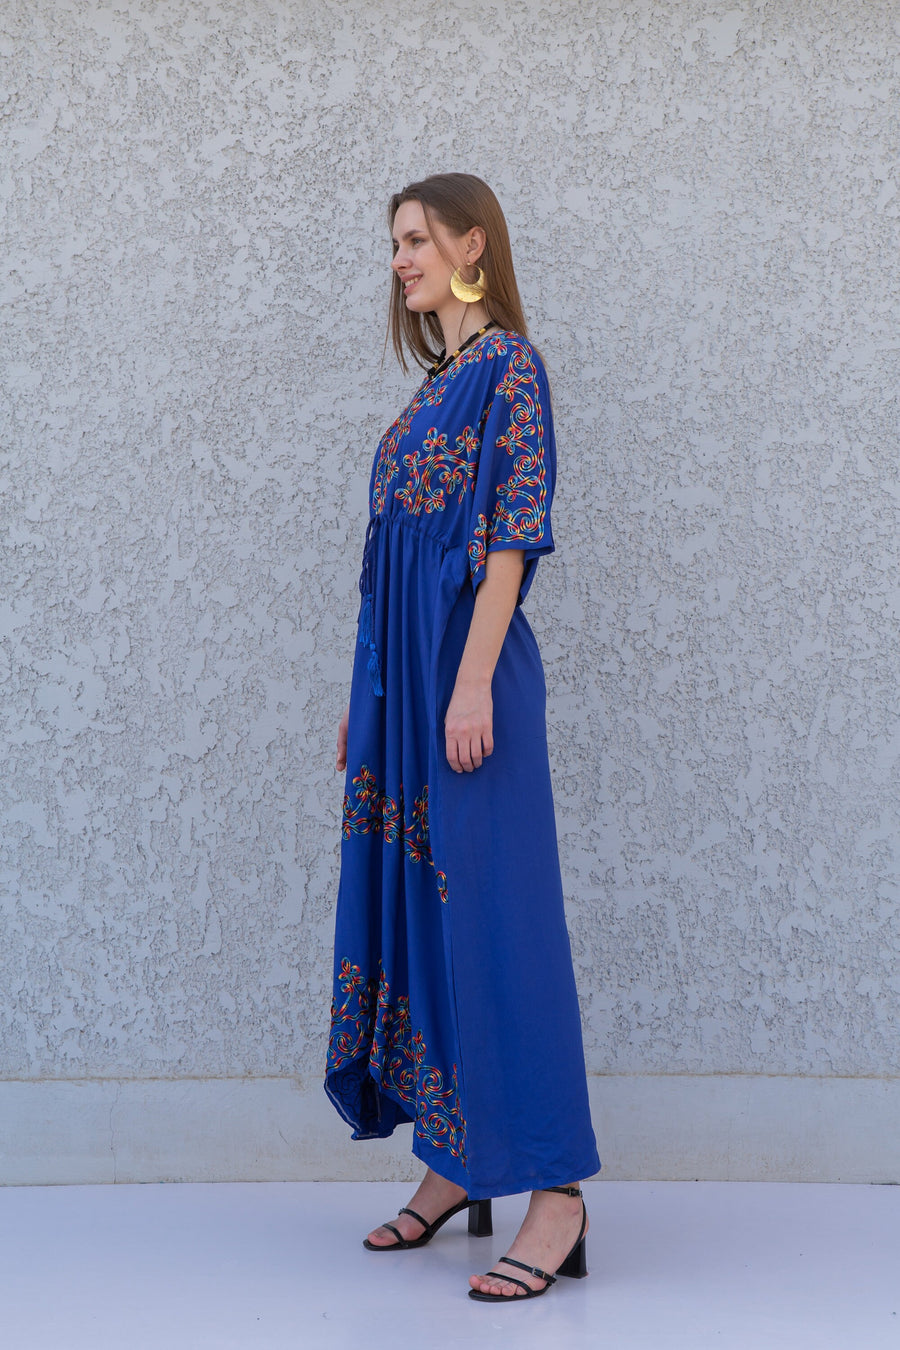 Chic Blue embroidered kaftan dress, house dress, African women clothing, Boho, caftans for women, caftans, kaftans, house kaftan